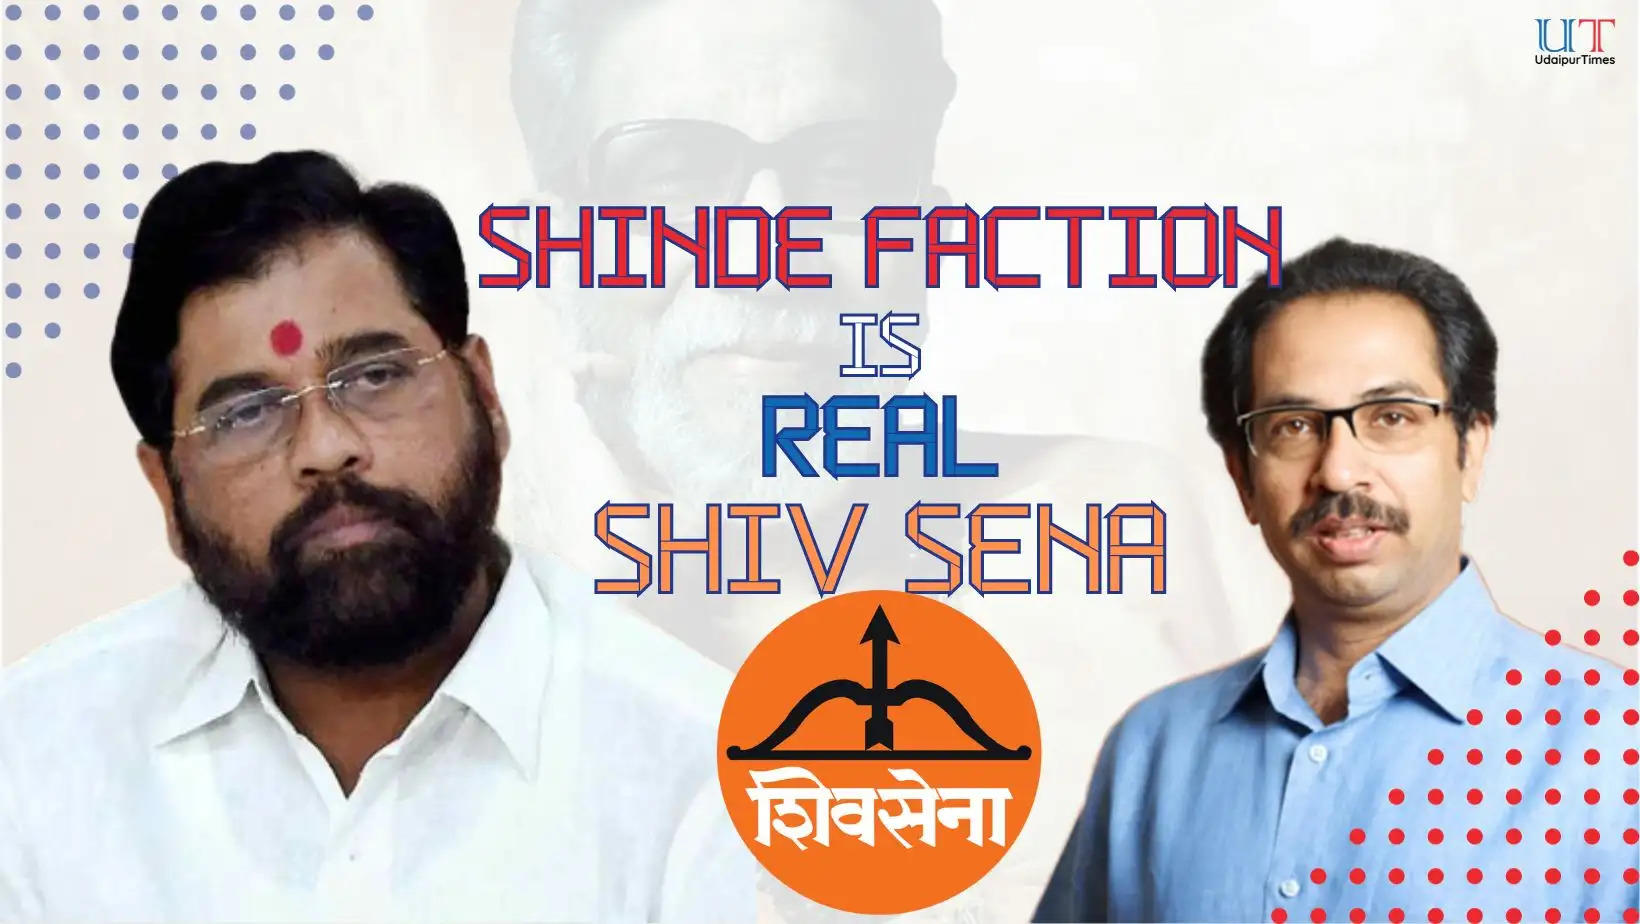 Maharashtra Speaker Announces that Shinde Faction is the Real Shiv Sena. No MLAs will be disqualified